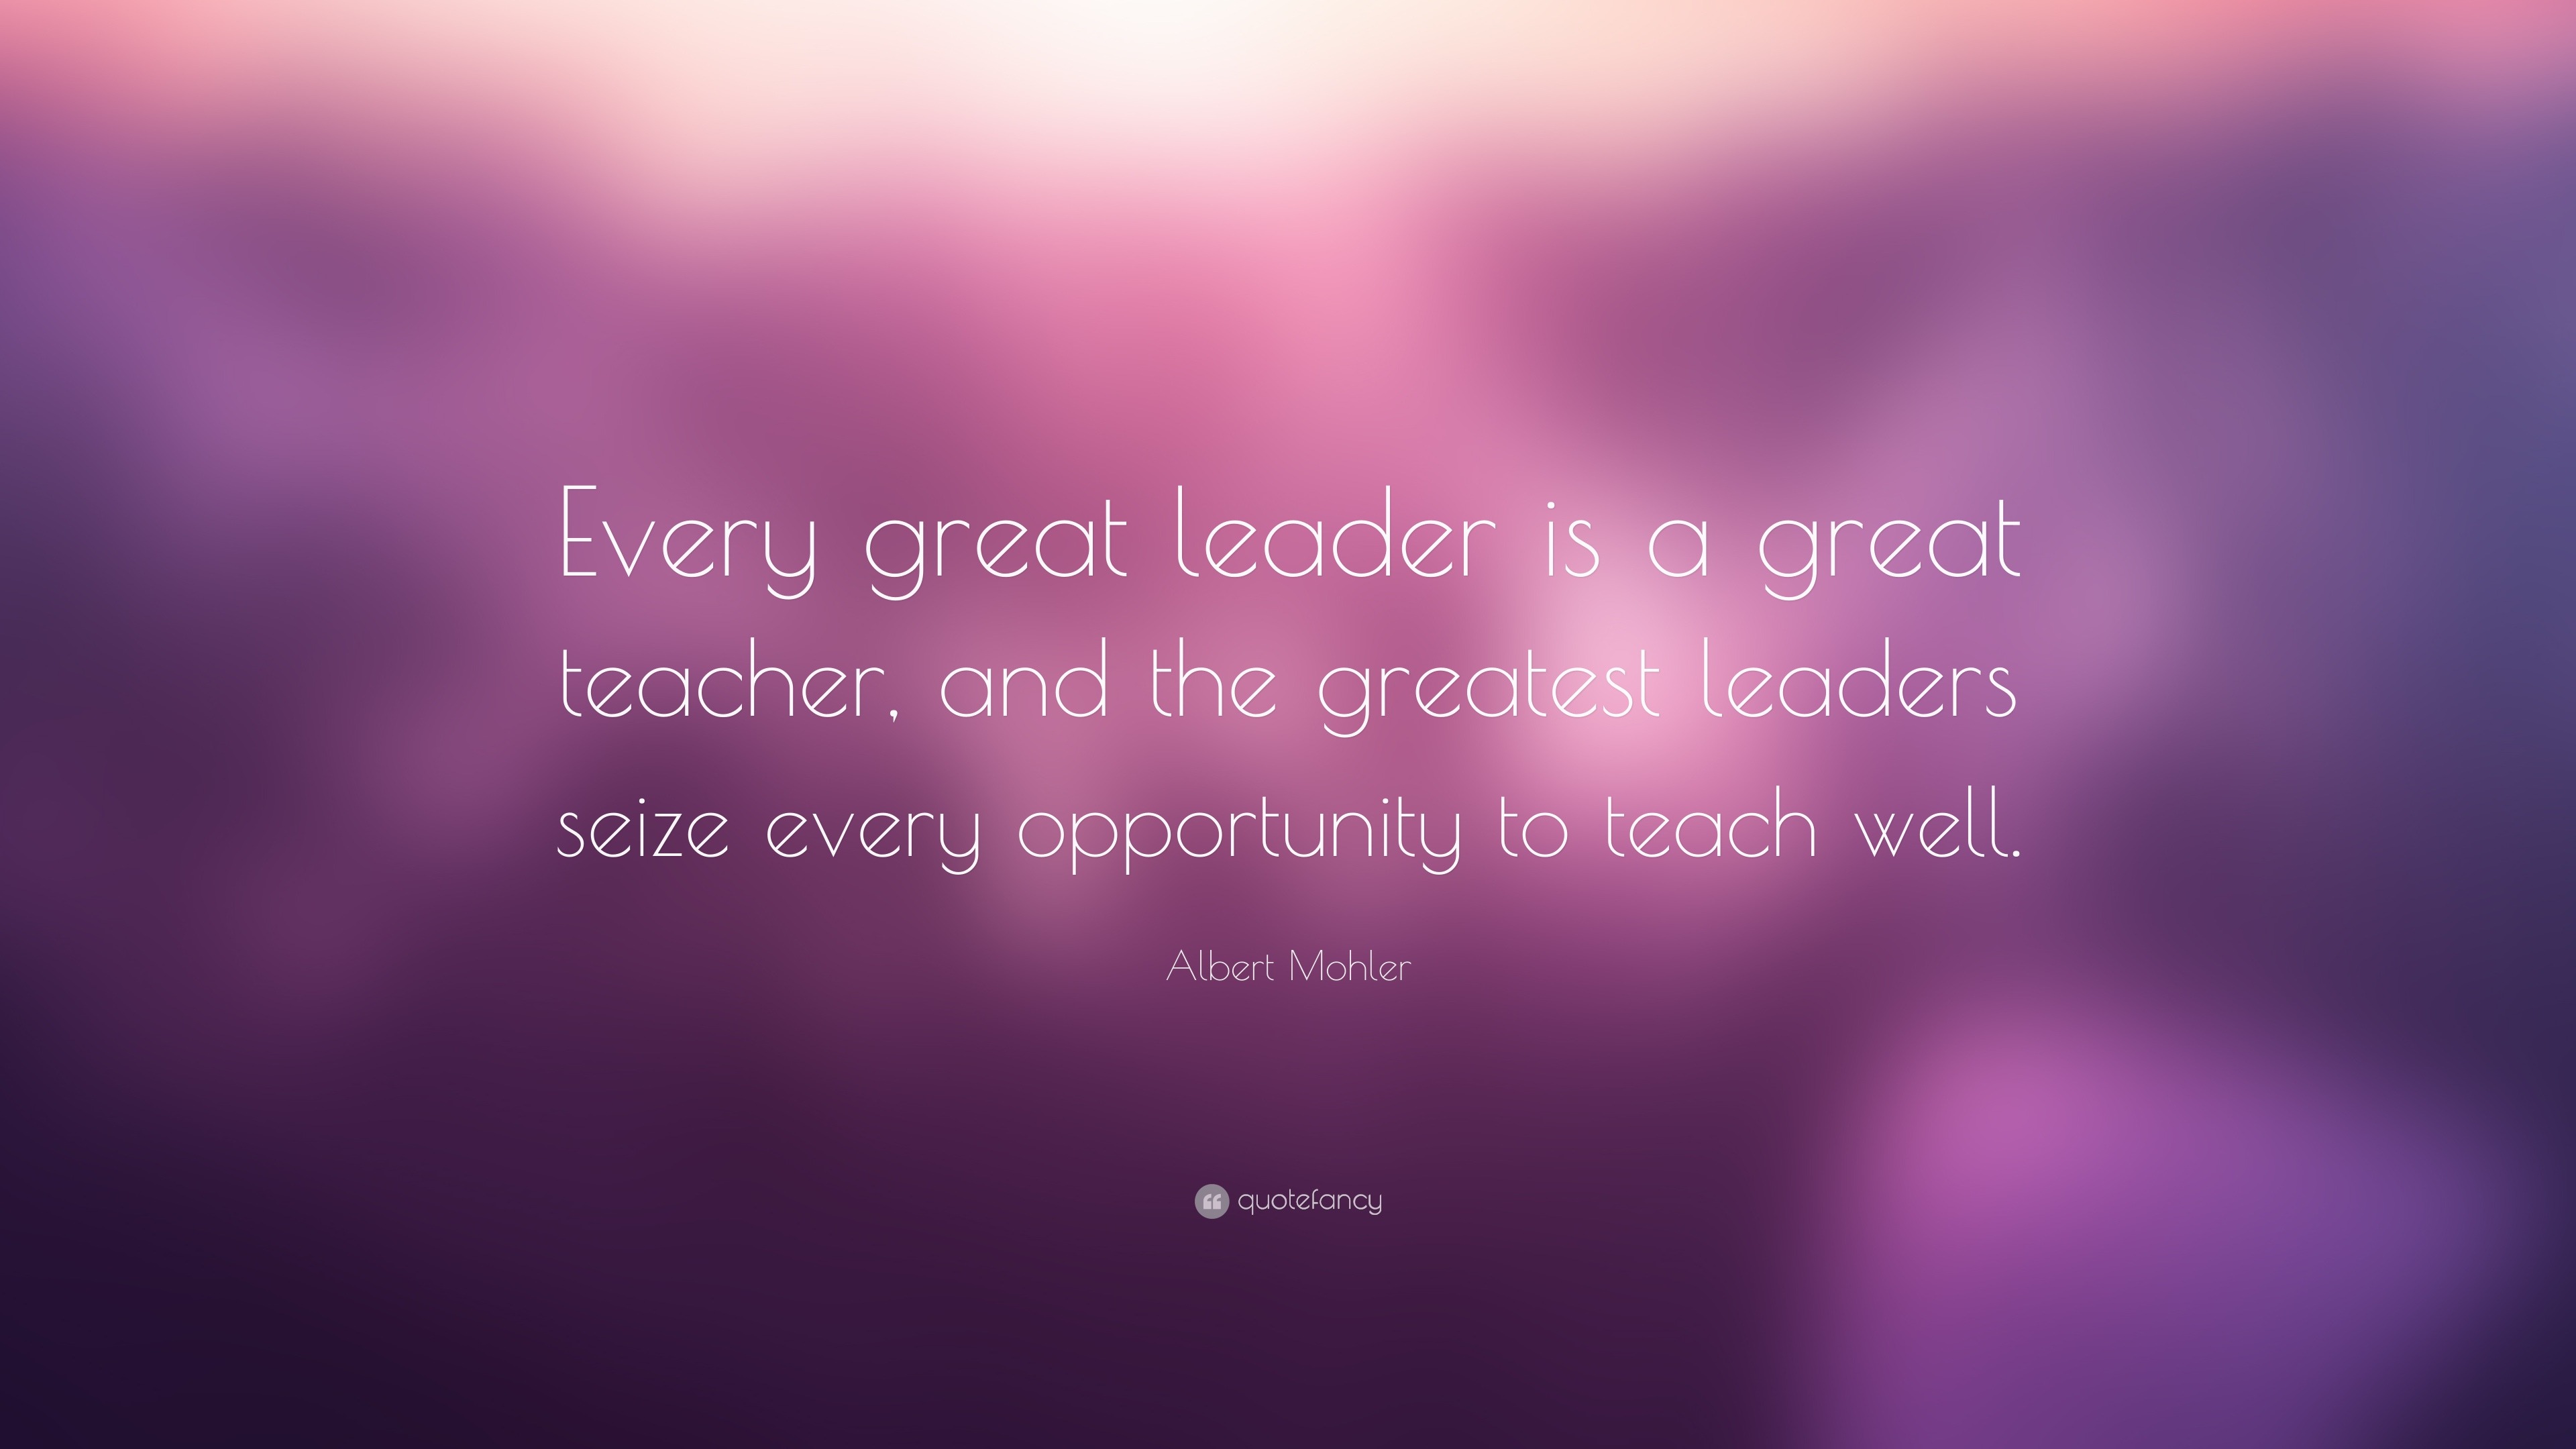 Albert Mohler Quote: “Every great leader is a great teacher, and the